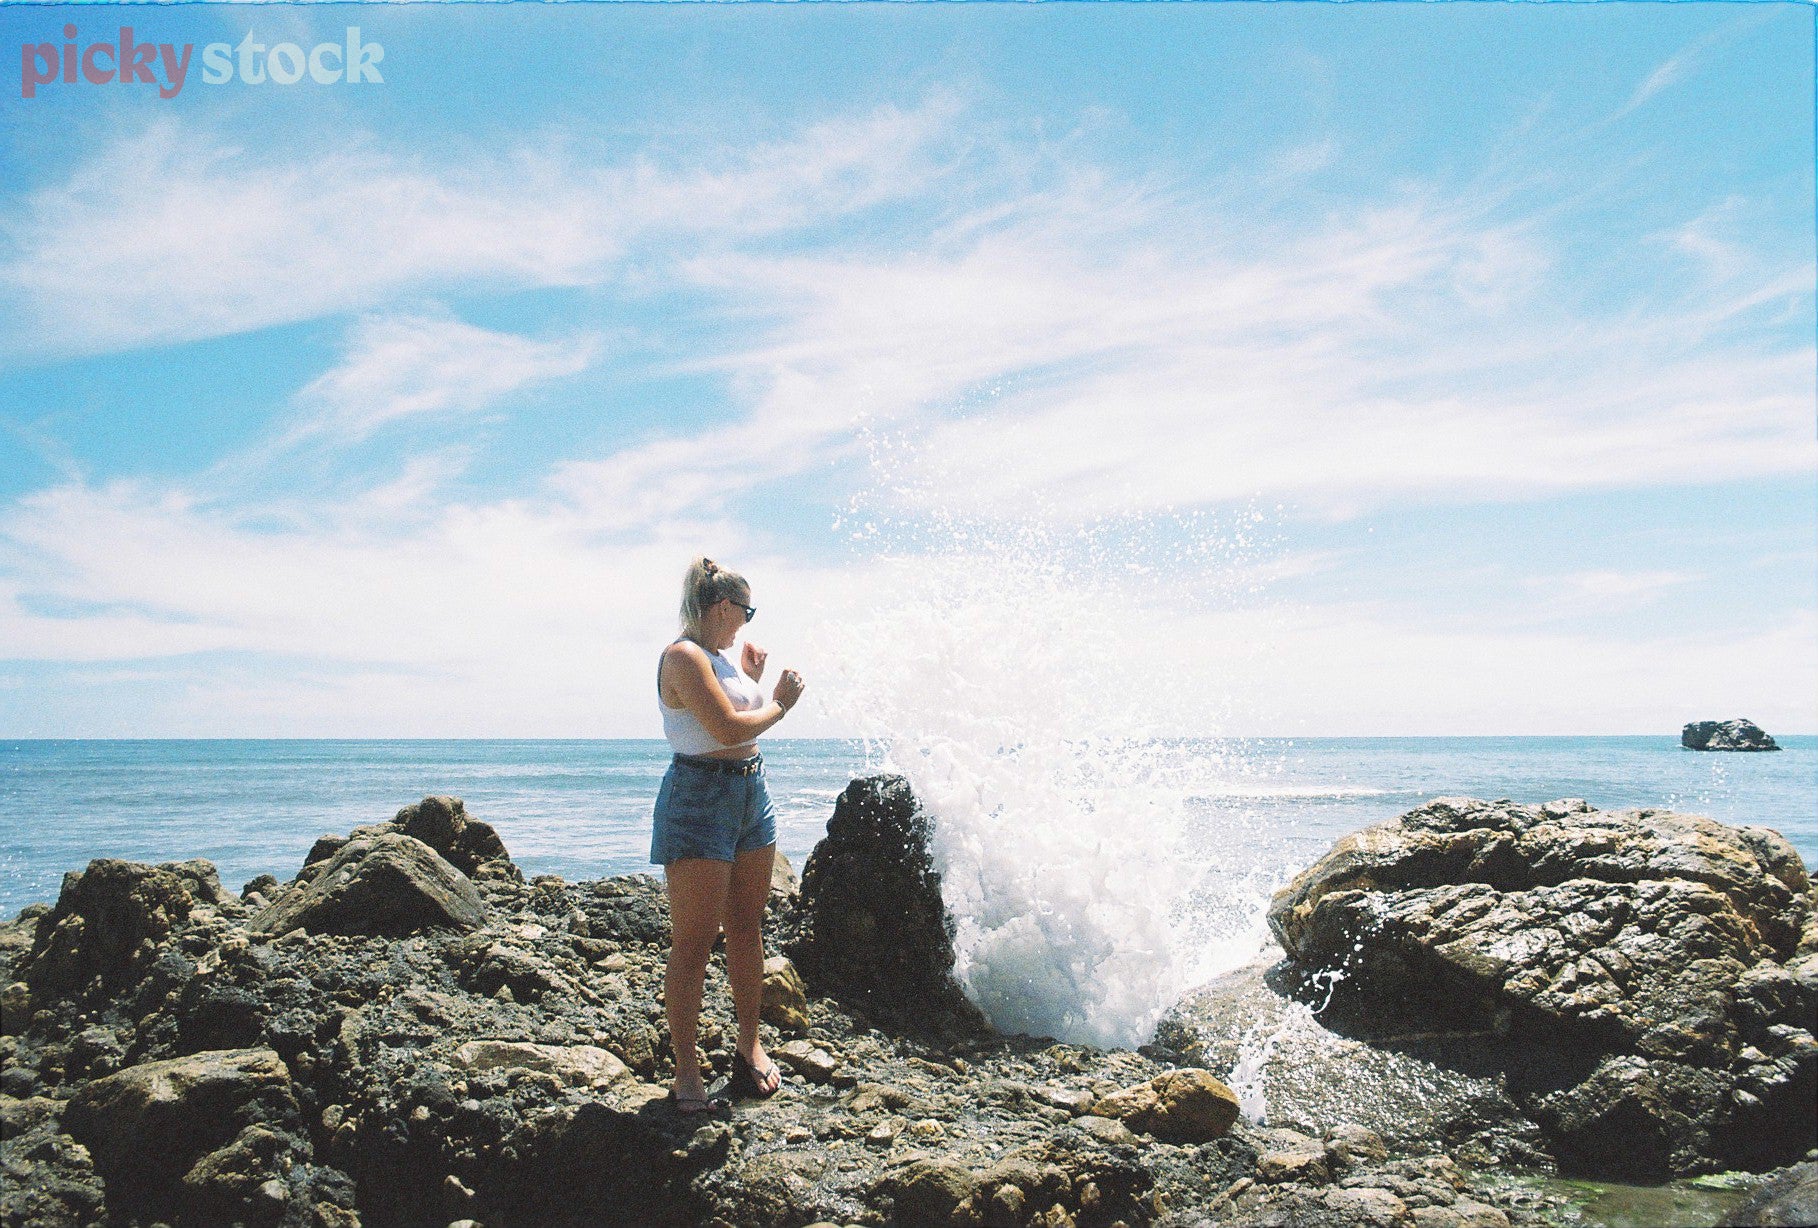 Lady stands on rocks near water, looking back over her shoulder out to sea as the salty sea spray hits her. 